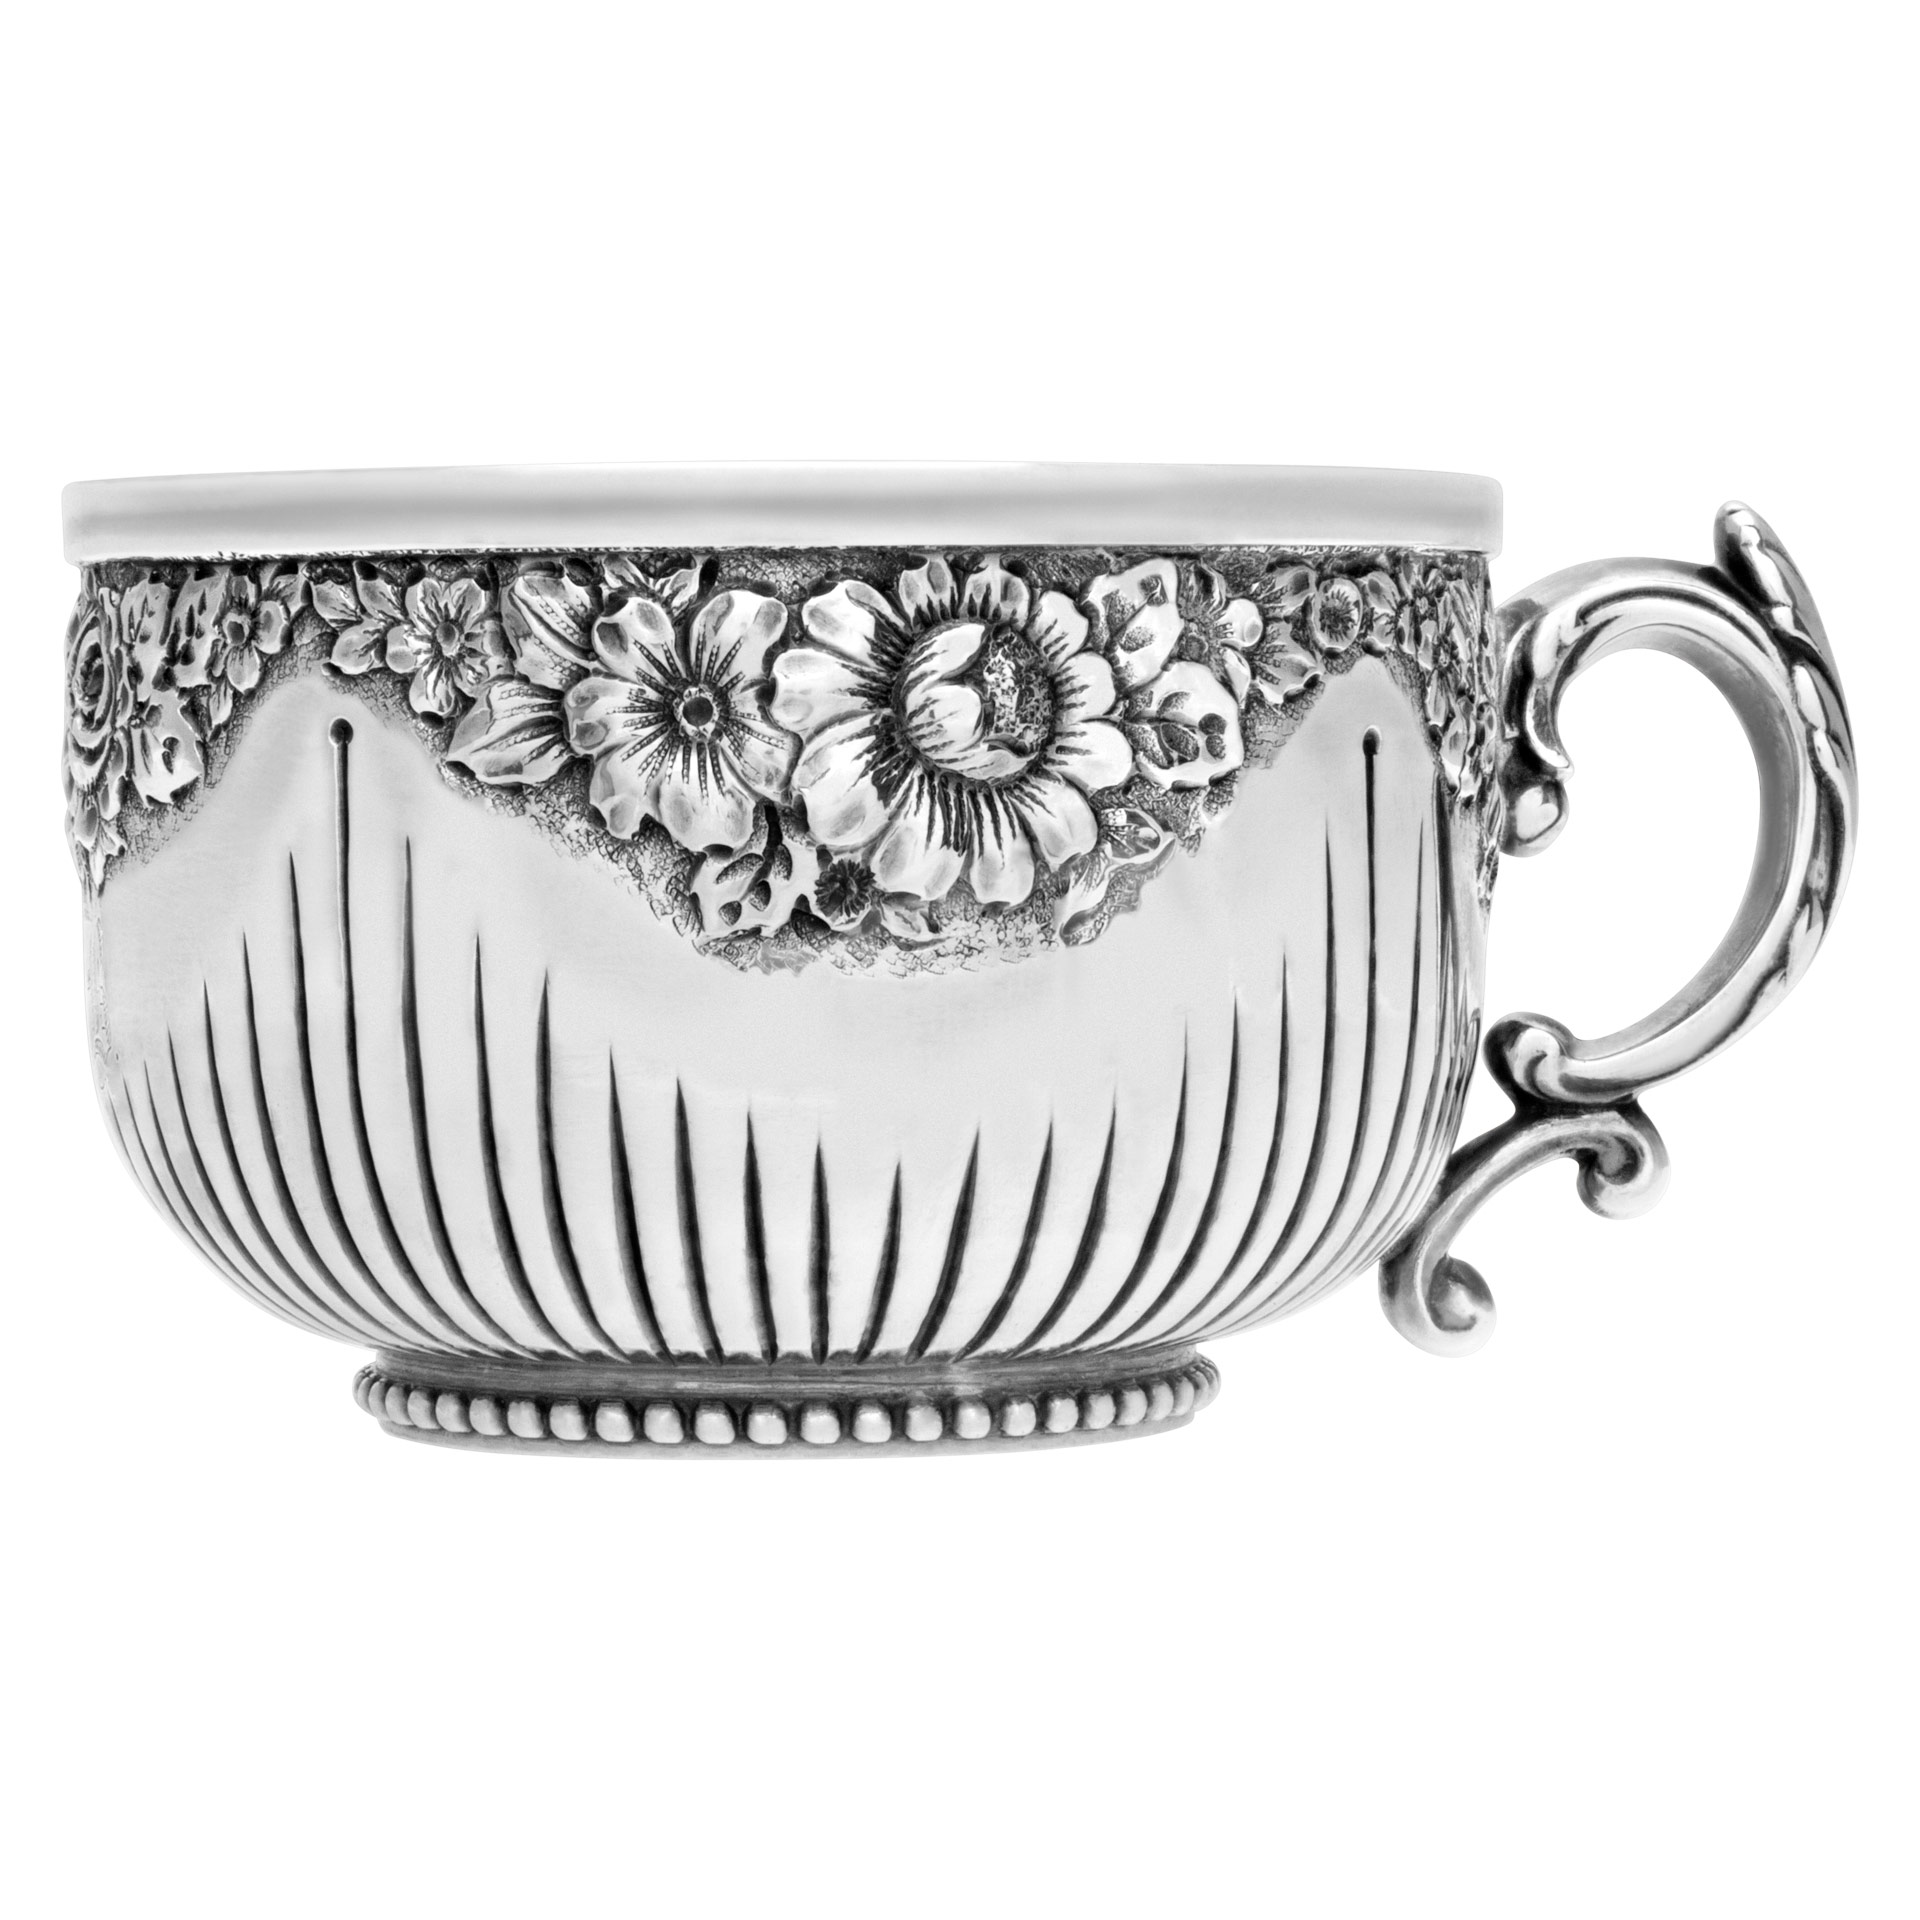  "Cluny" Ptd 1883, Pair Of Sterling Silver Demi-Tasse Coffe Cup With Matching Saucer.